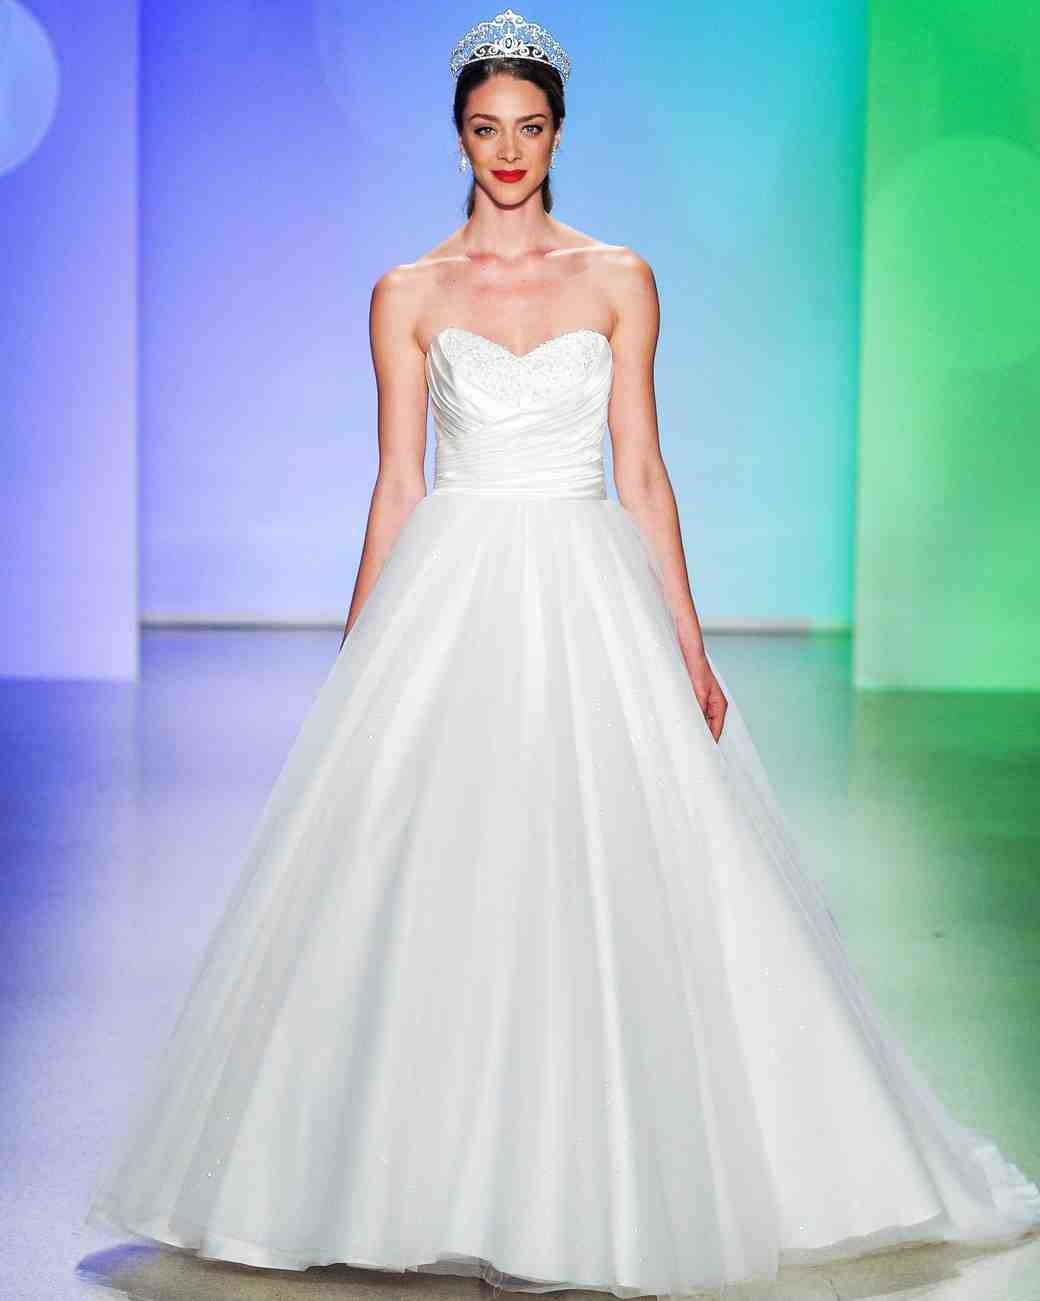 Disney Princesses Wedding Dress Collection by Alfreda Angelo Love the Belle  one